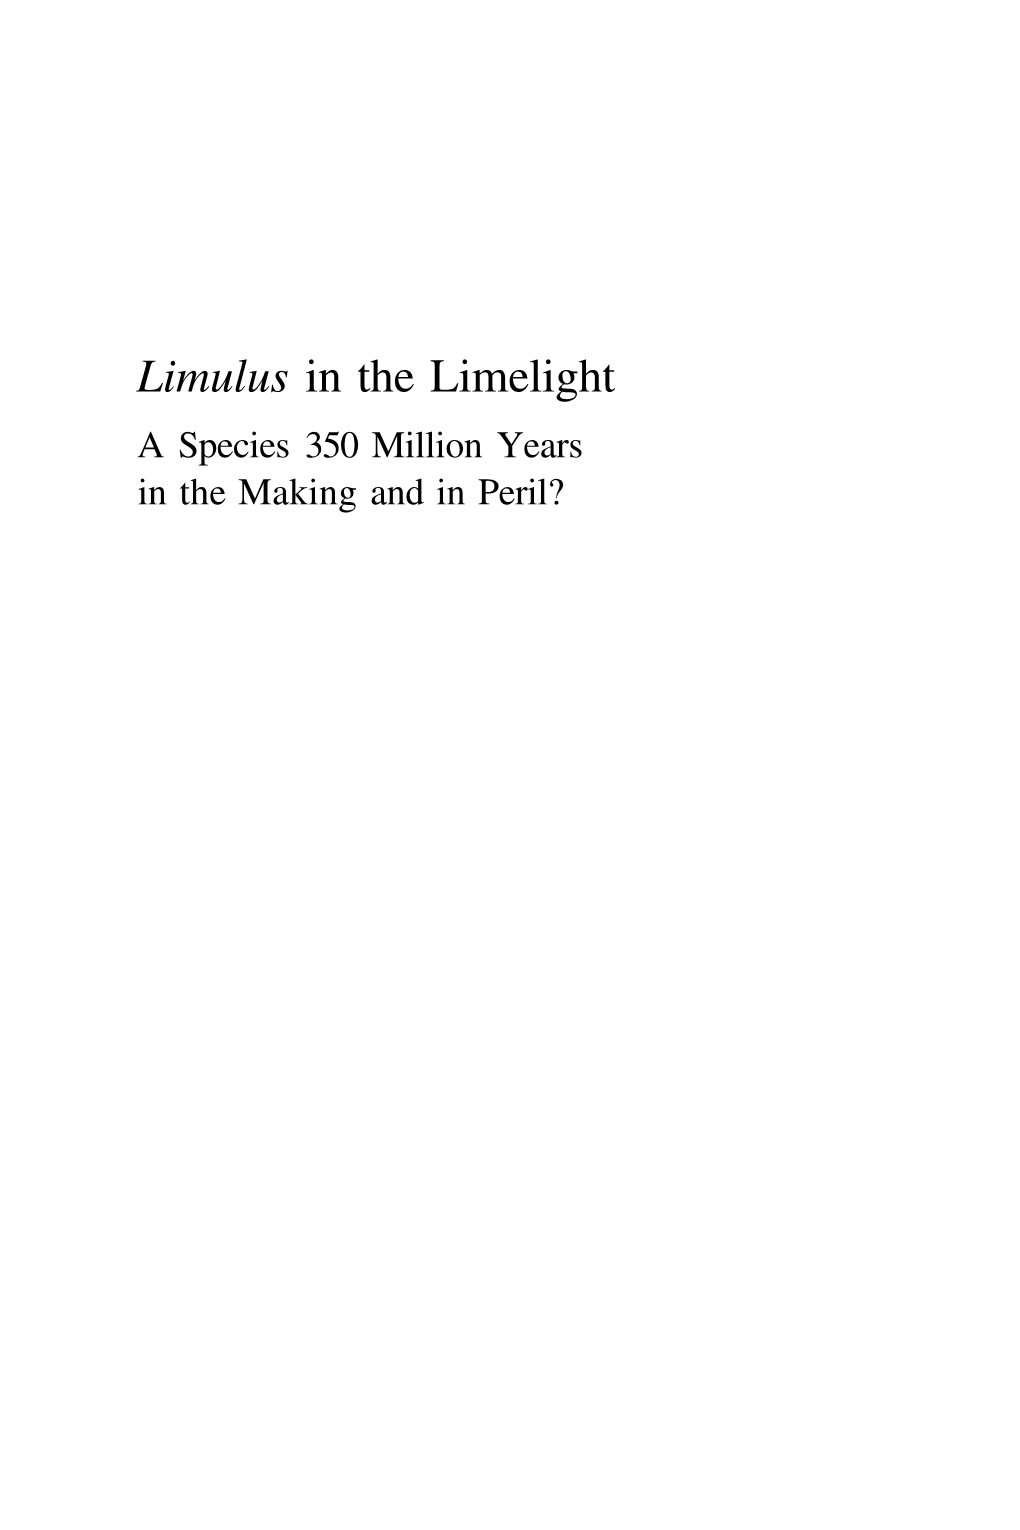 Limulus in the Limelight a Species 350 Million Years in the Making and in Peril? Limulus in the Limelight a Species 350 Million Years in the Making and in Peril?